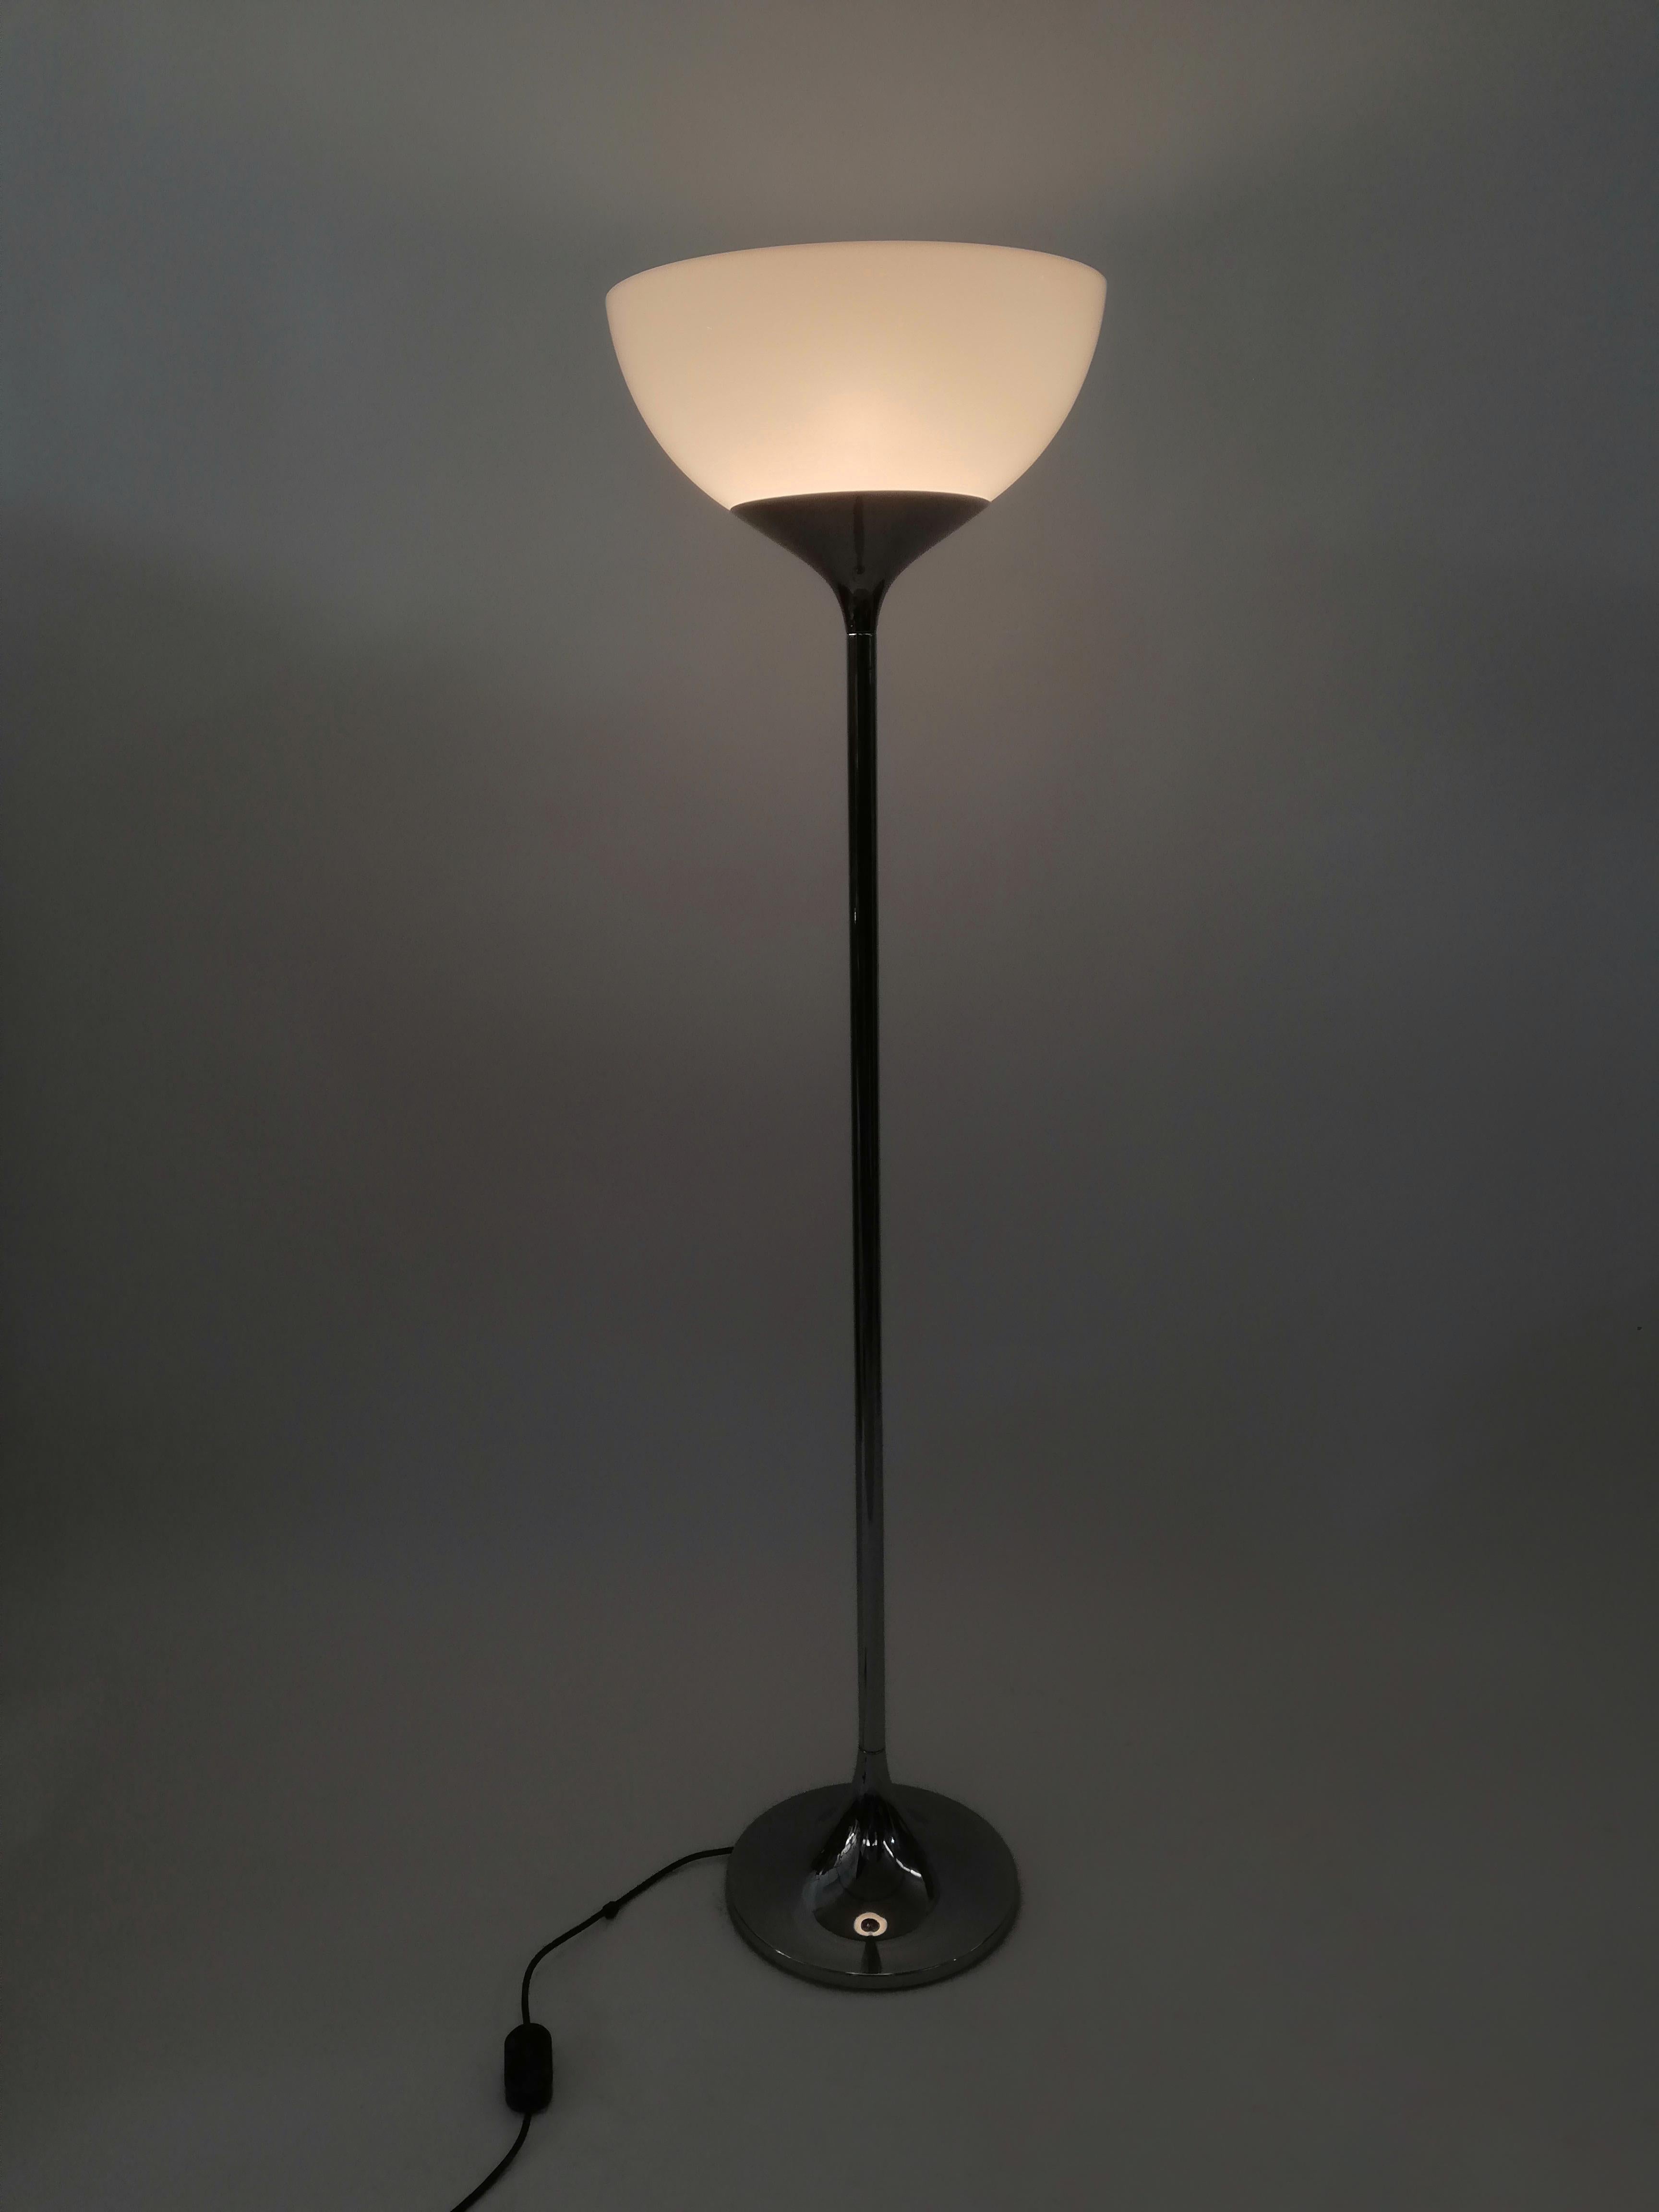 A Space Age floor lamp designed by Franco Bresciani and produced by 